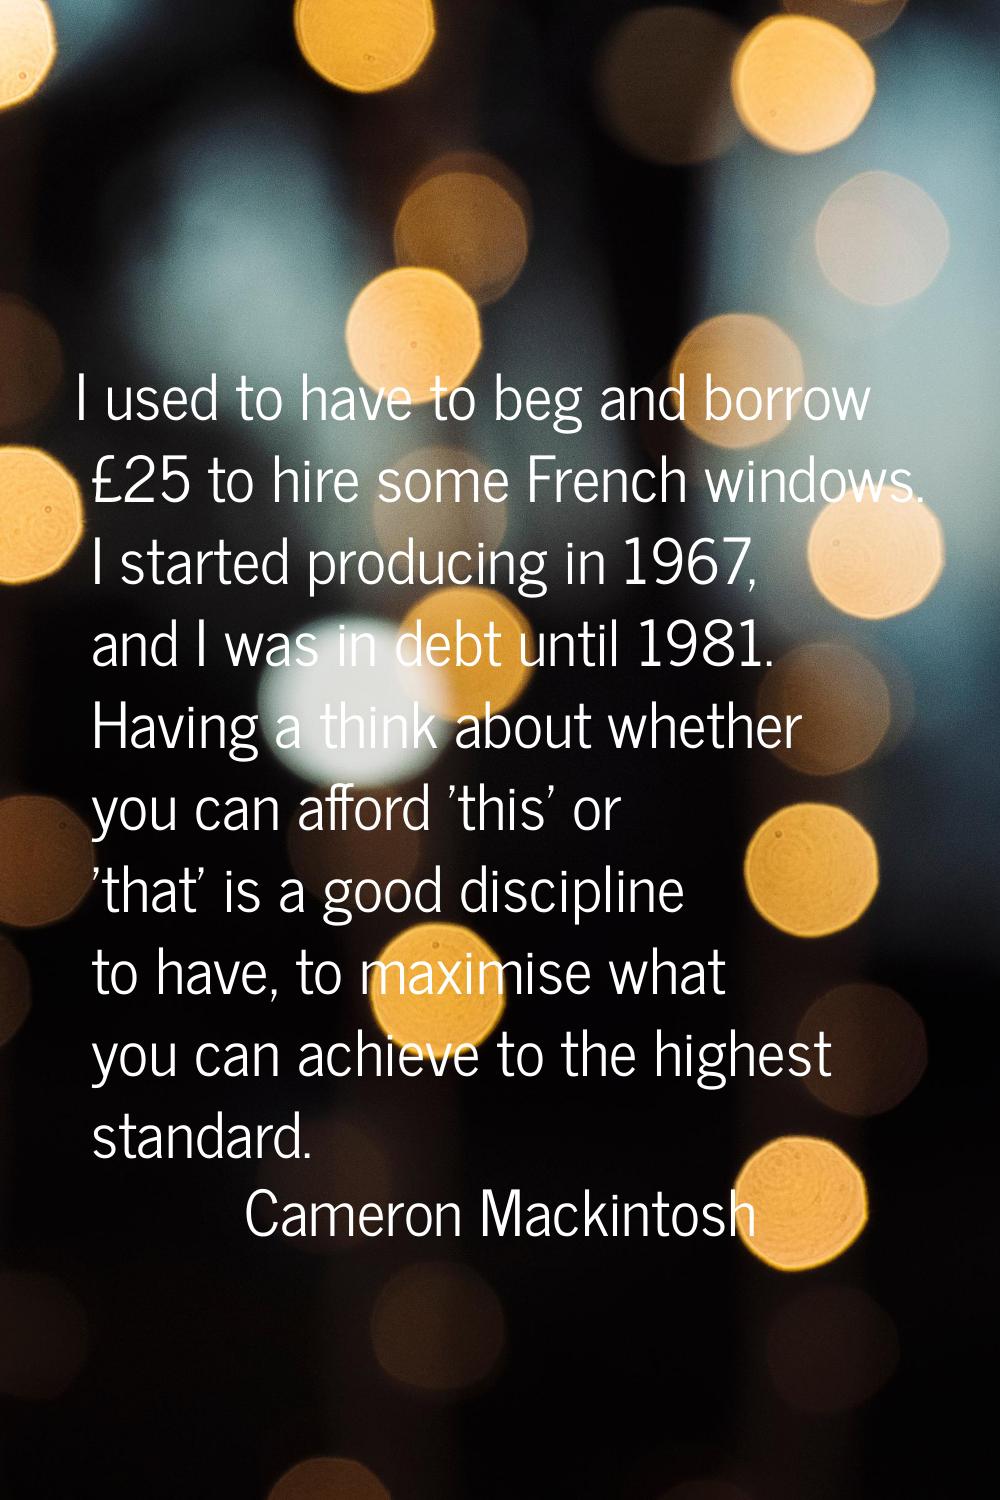 I used to have to beg and borrow £25 to hire some French windows. I started producing in 1967, and 